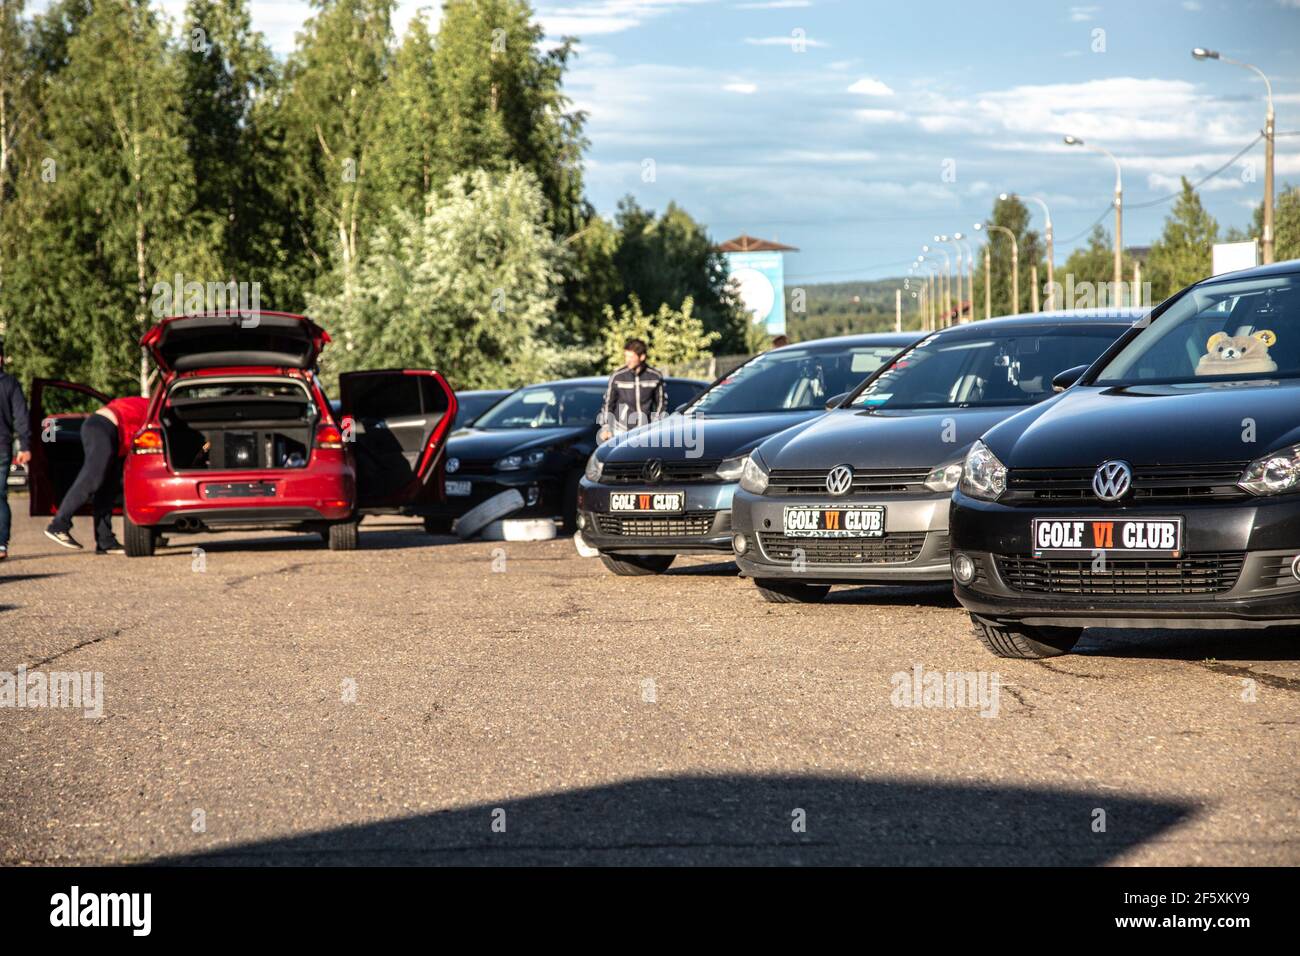 Moscow, Russia - July 6, 2019: Many multi-colored Volkswagen Golf 6 generation cars. Club meeting MK6 car lovers Stock Photo